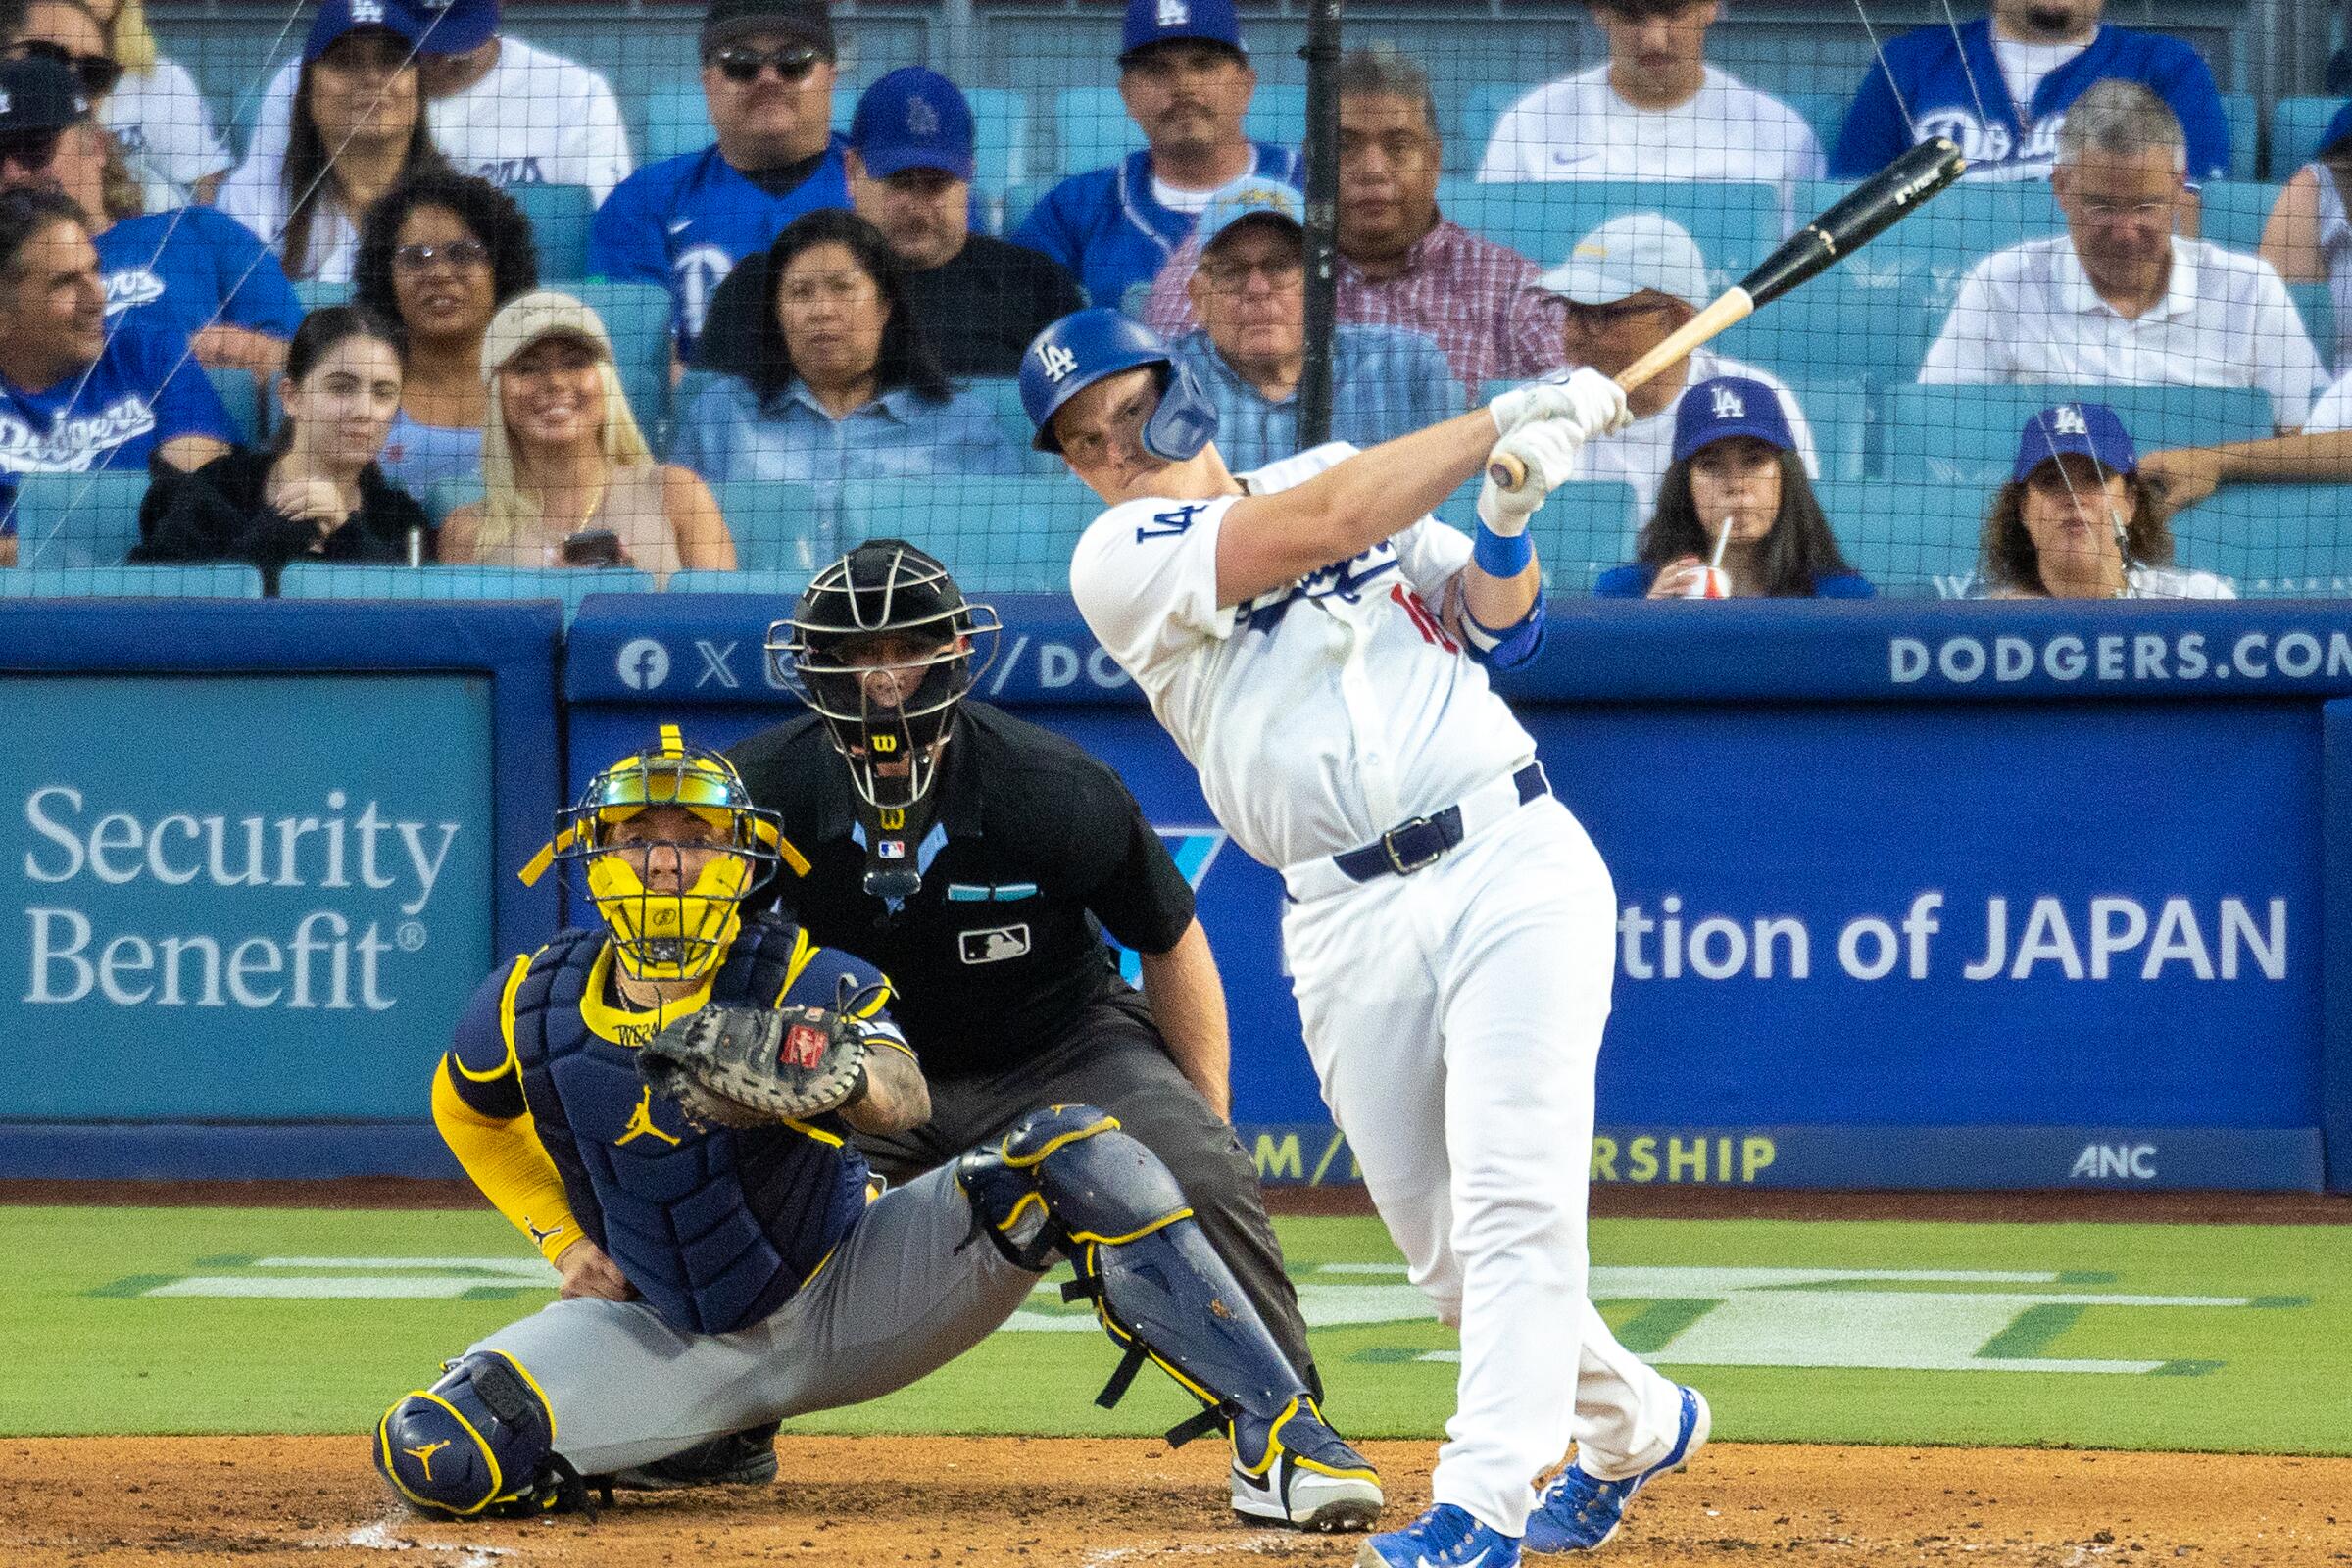 Dodgers catcher Will Smith hits his second home run of the night against the Brewers at Dodger Stadium.